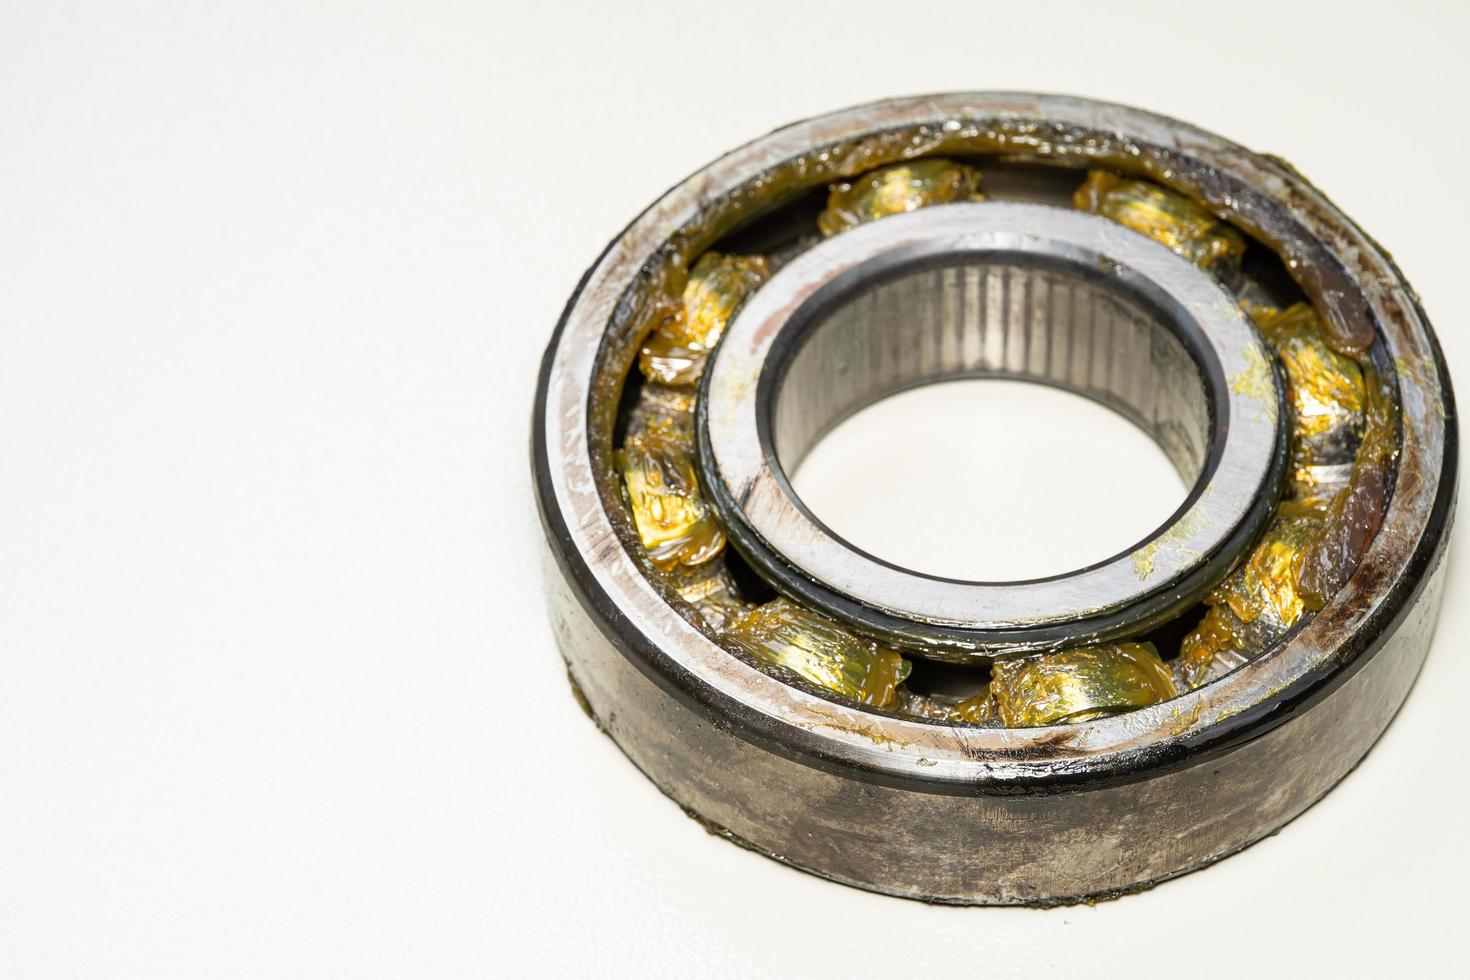 old bearing car.expire bearing car isoleted on white background. old rusty ball bearing photo